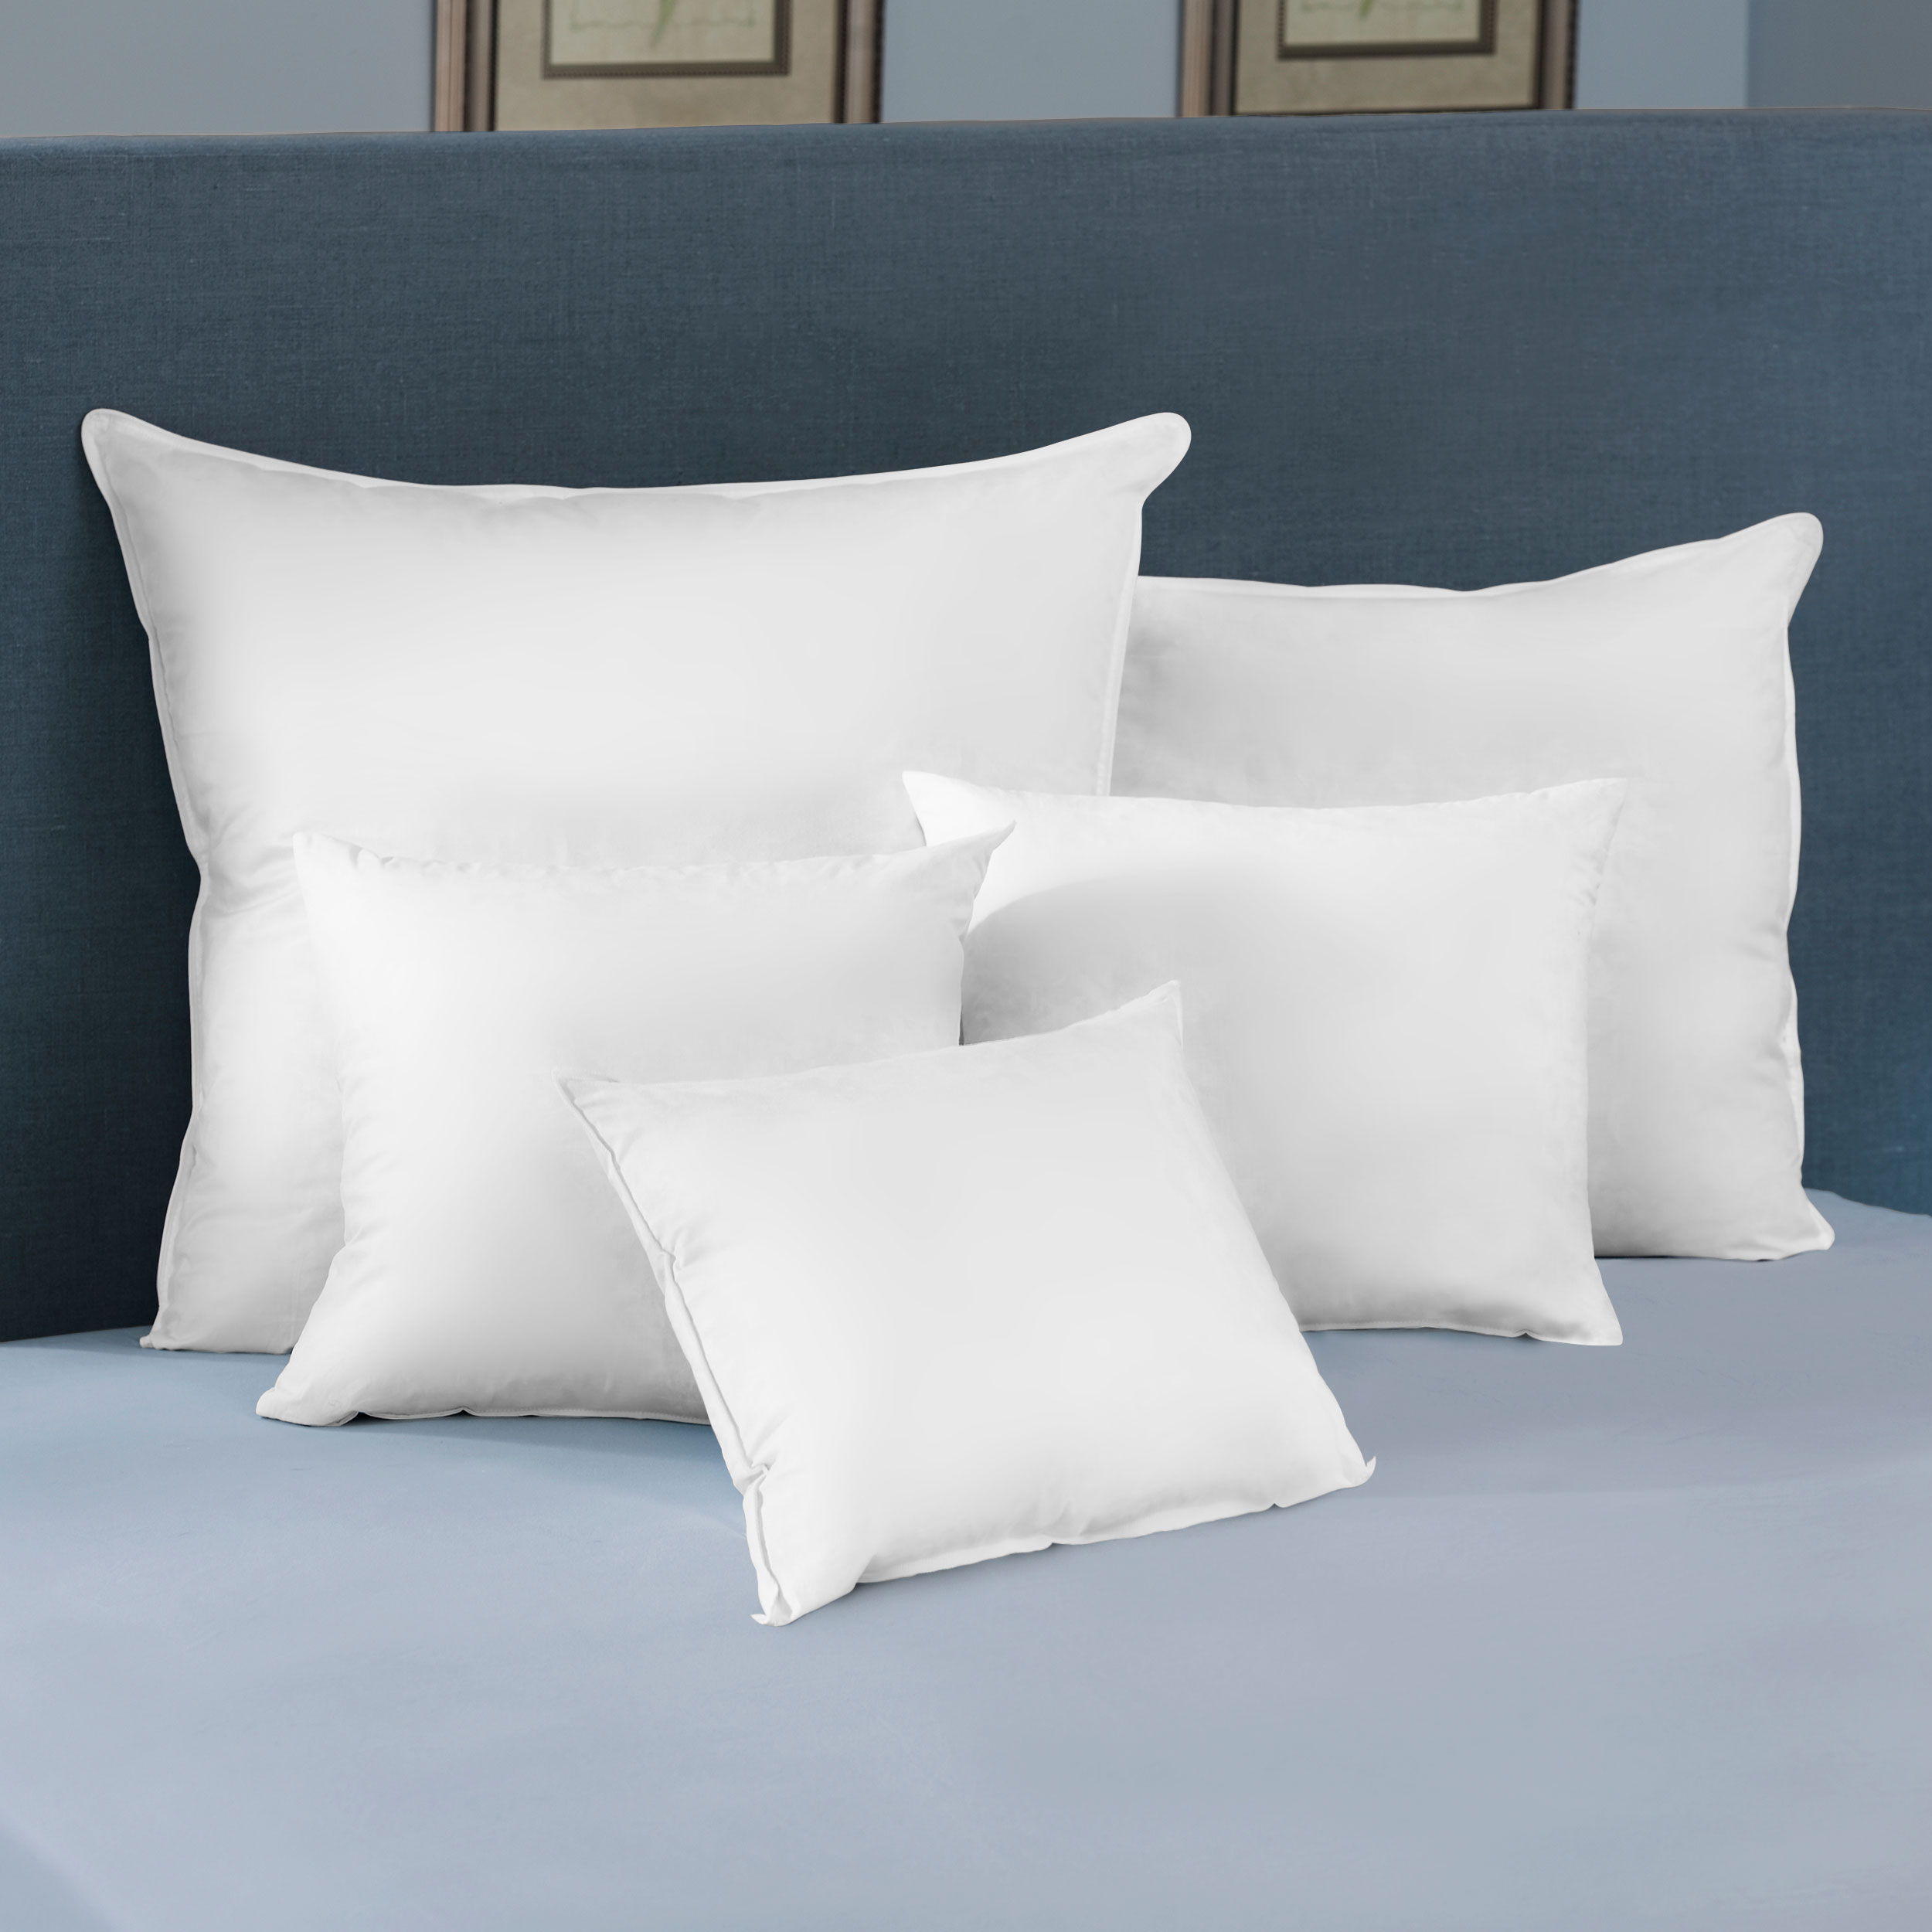 Pacific Coast Euro Square Pillow Insert 230 Thread Count 100% Cotton Down Proof Fabric Resilia Feathers - 22" X 22"